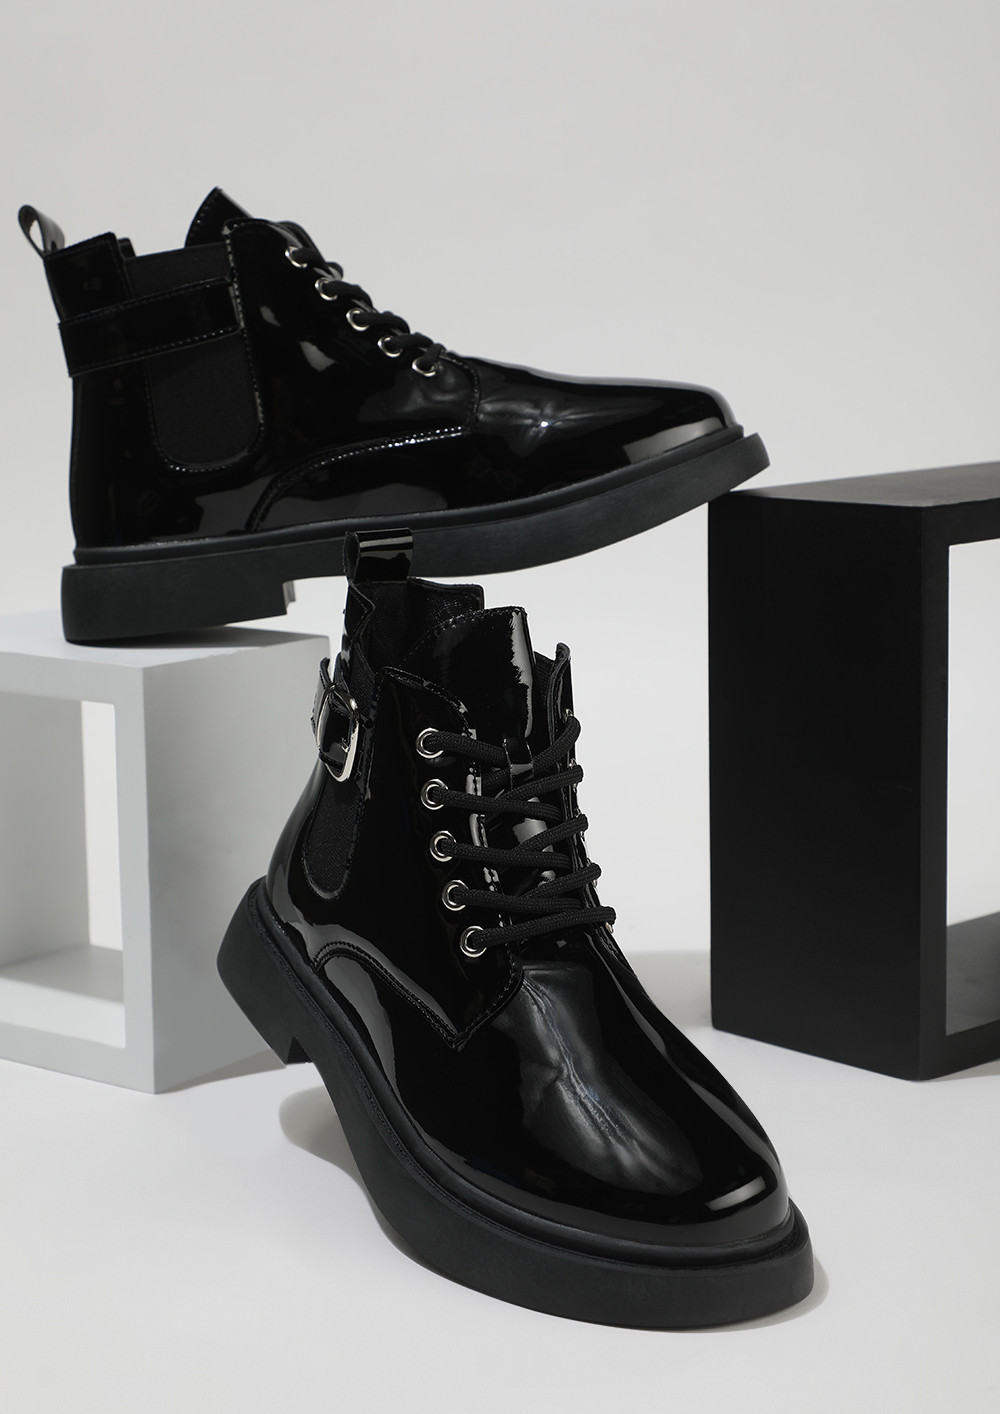 ENERGY OVERFLOW PATENT BLACK ANKLE BOOTS